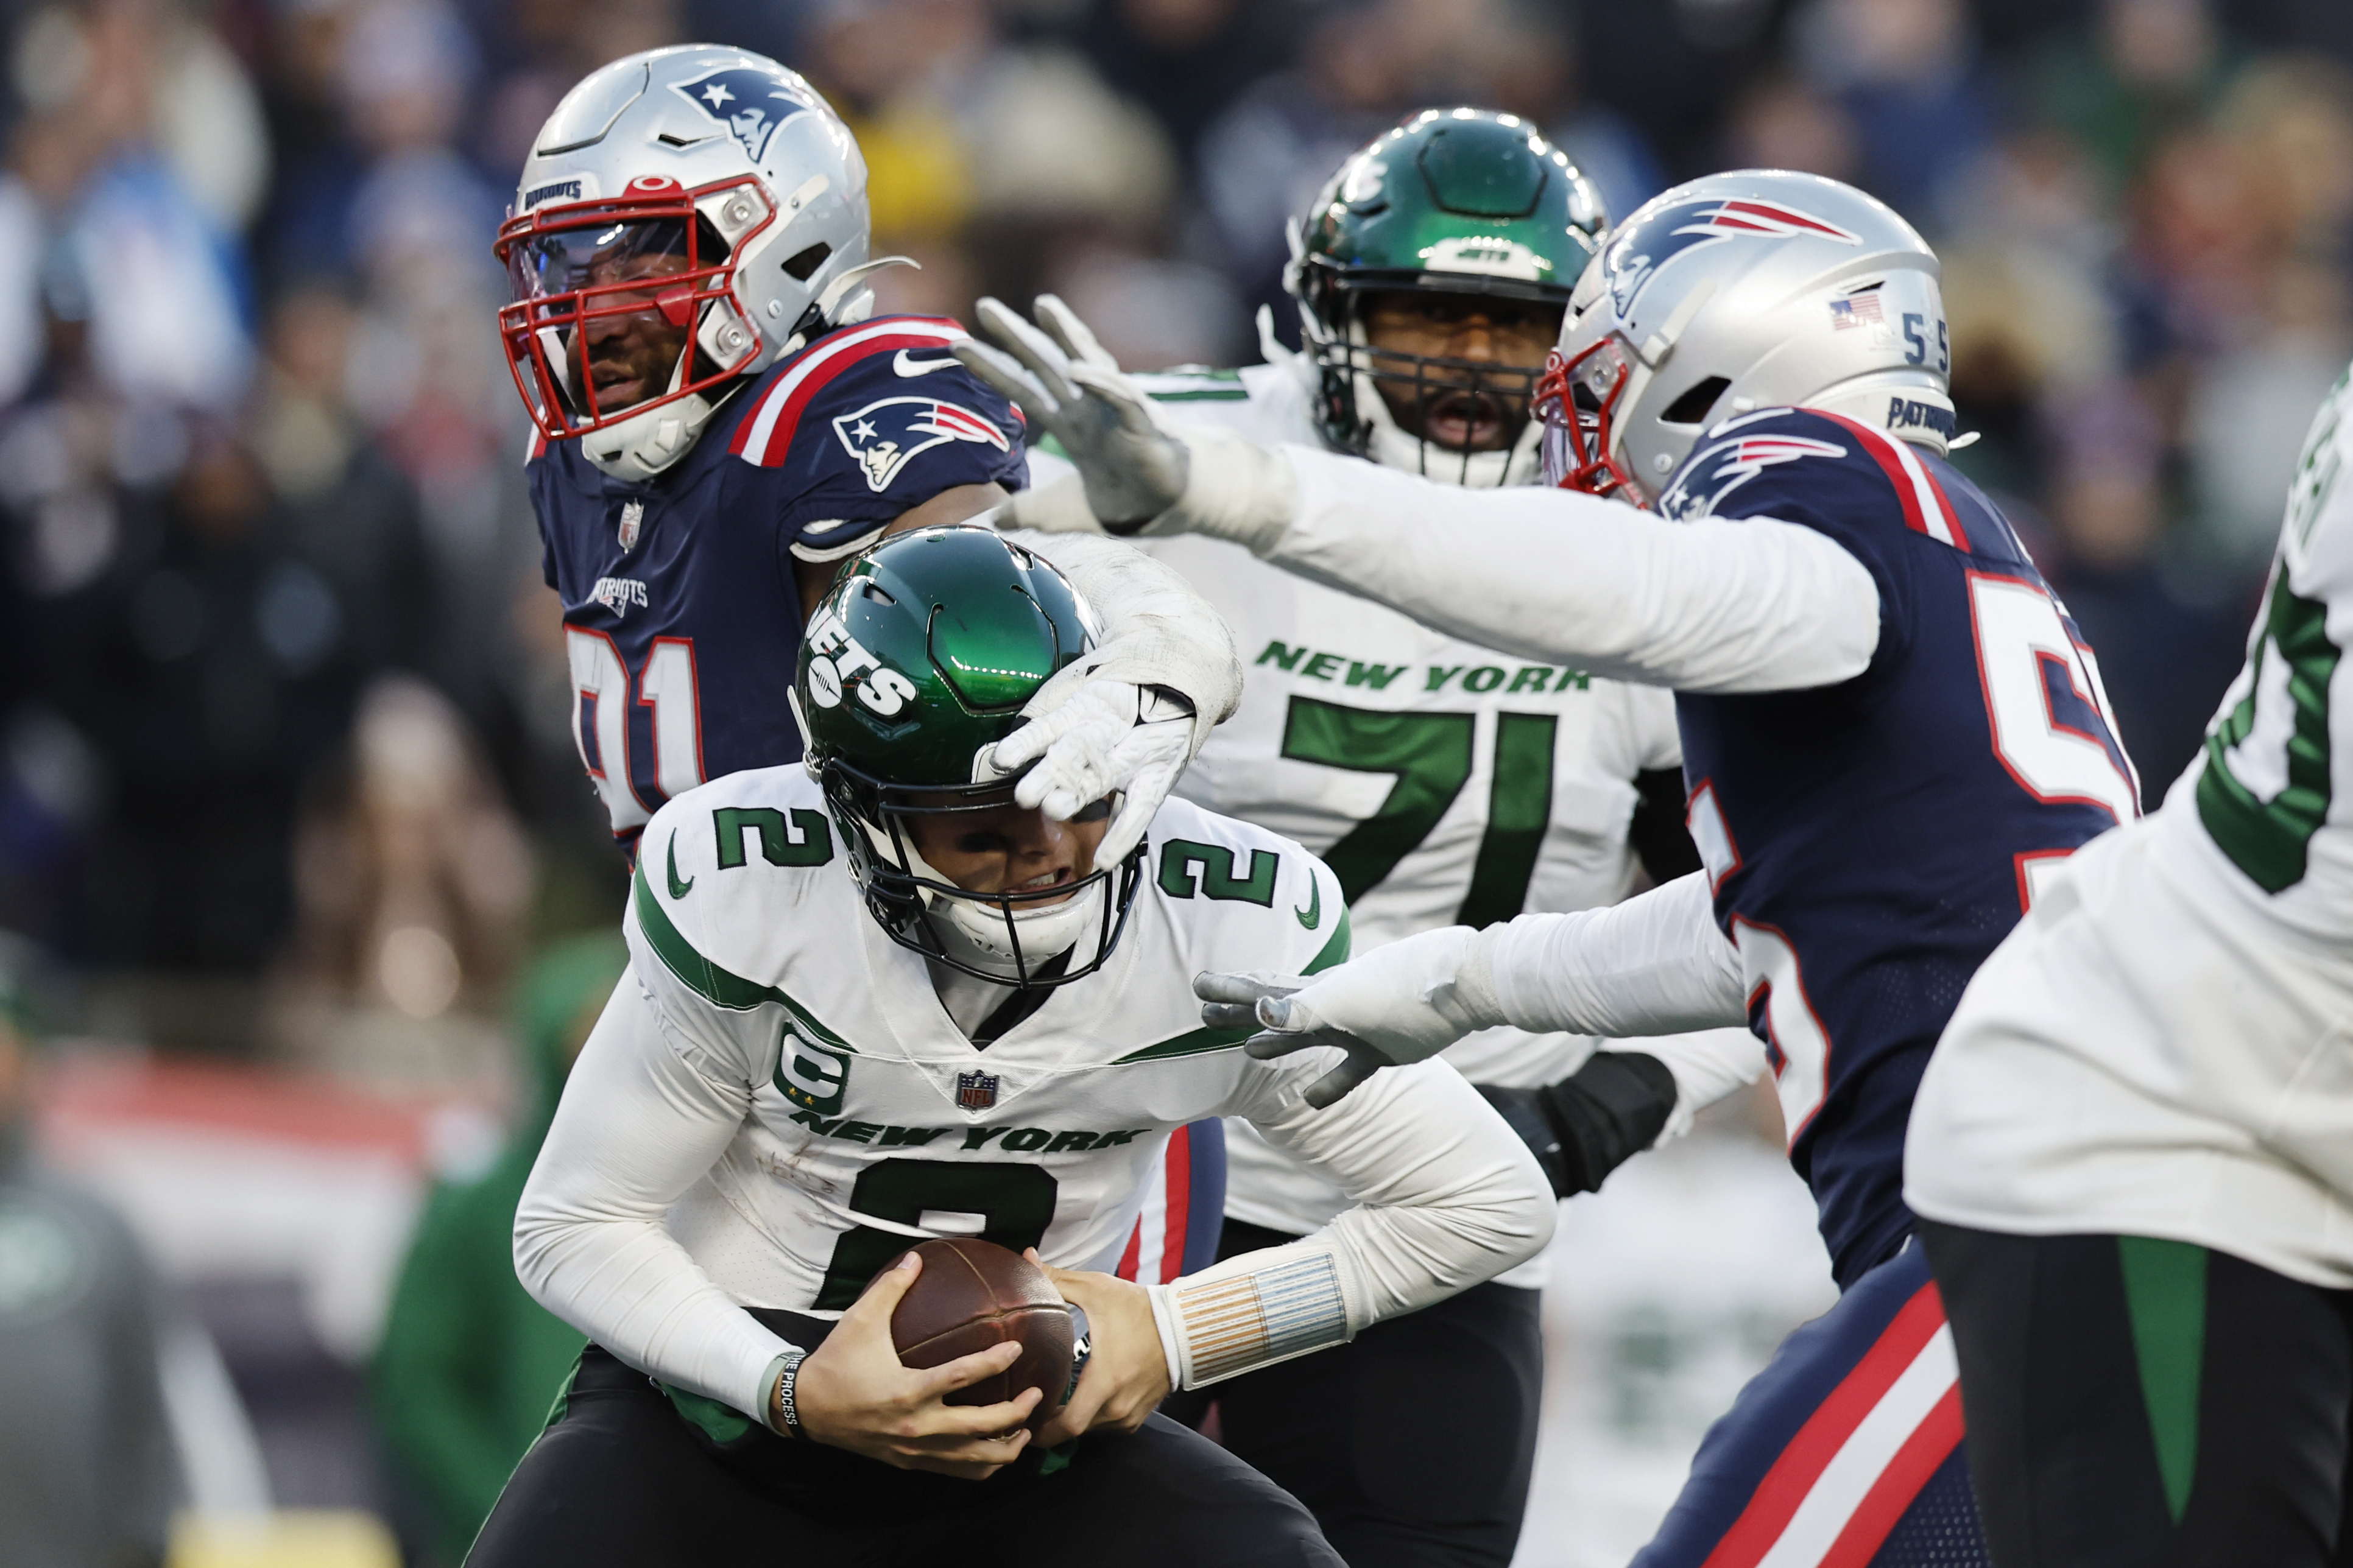 Game day at a Glance; Jets Prep for Battle Without Zach Wilson, Face Bears  at MetLife